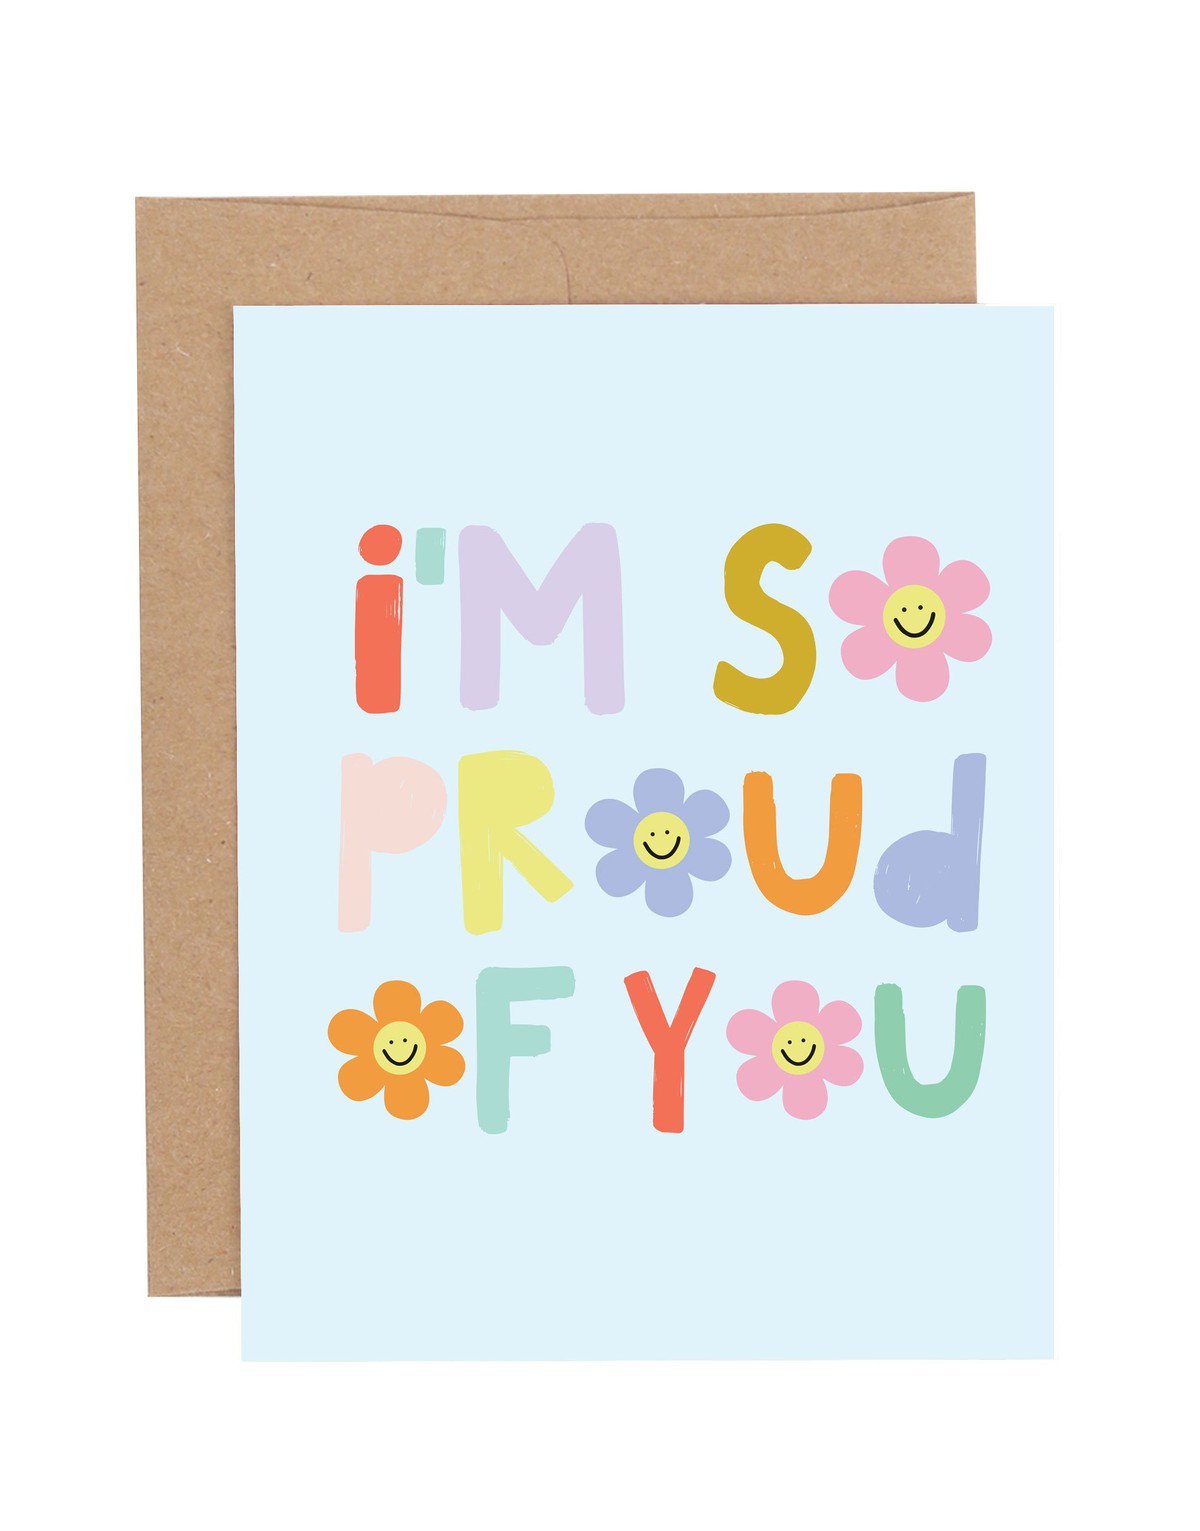 So Proud Of You Greeting Card item